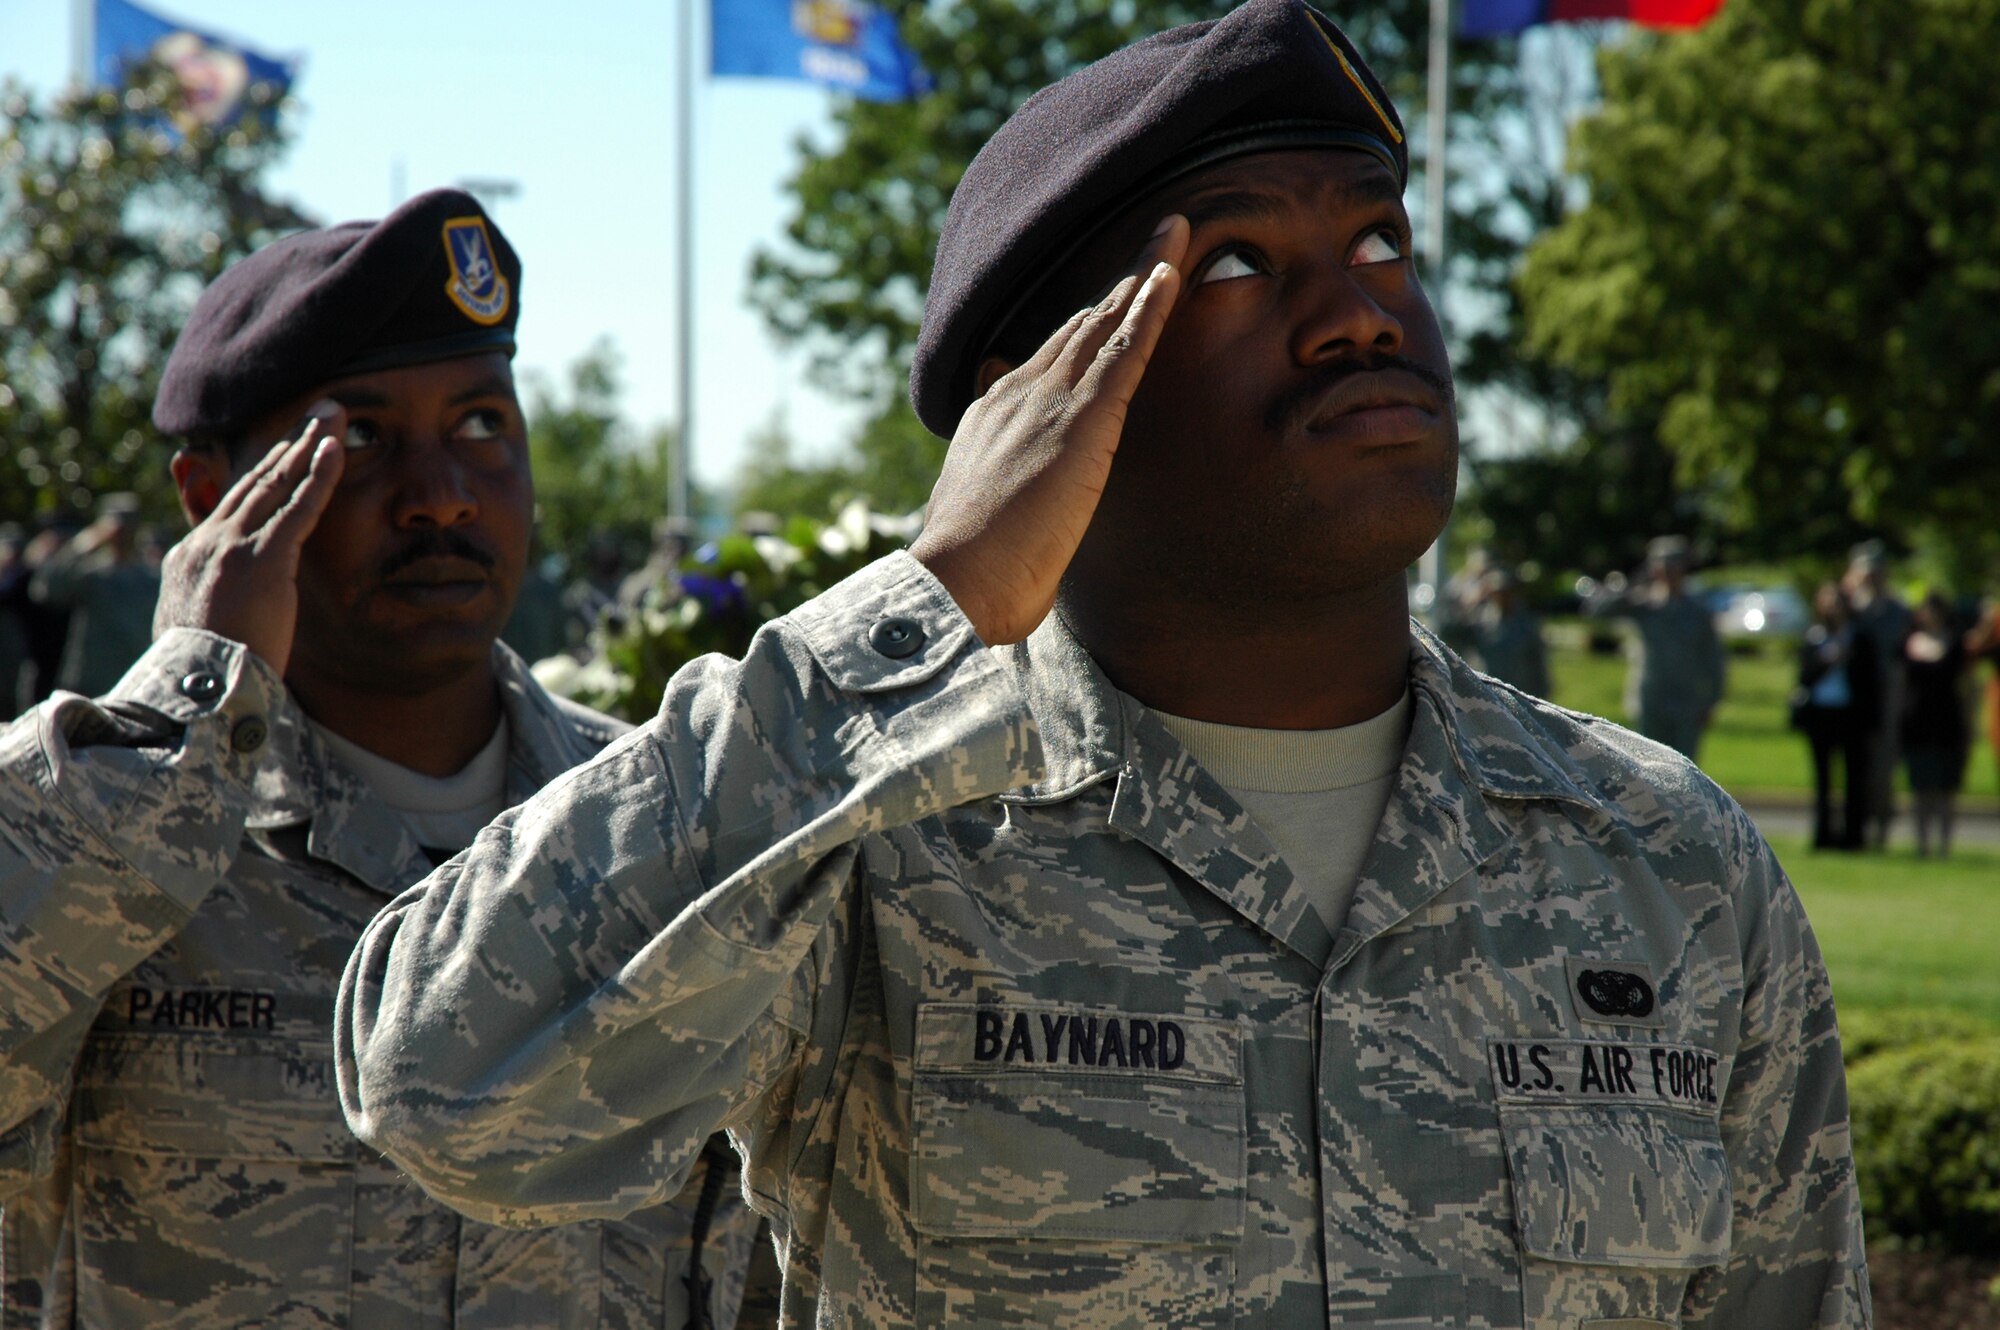 Airman 1st Class James Baynard and Tech. Sgt. James Parker, 11th Security Forces Squadron, prepare to catch the flag as it is lowered during a retreat ceremony May 20, 2009 on Bolling Air Force Base. The retreat ceremony was held in honor of Chief Airey, to allow individuals unable to attend his funeral at Arlington National Cemetery on May 28 a chance to pay their respects. (U.S. Air Force photo by Airman 1st Class Katherine Windish)